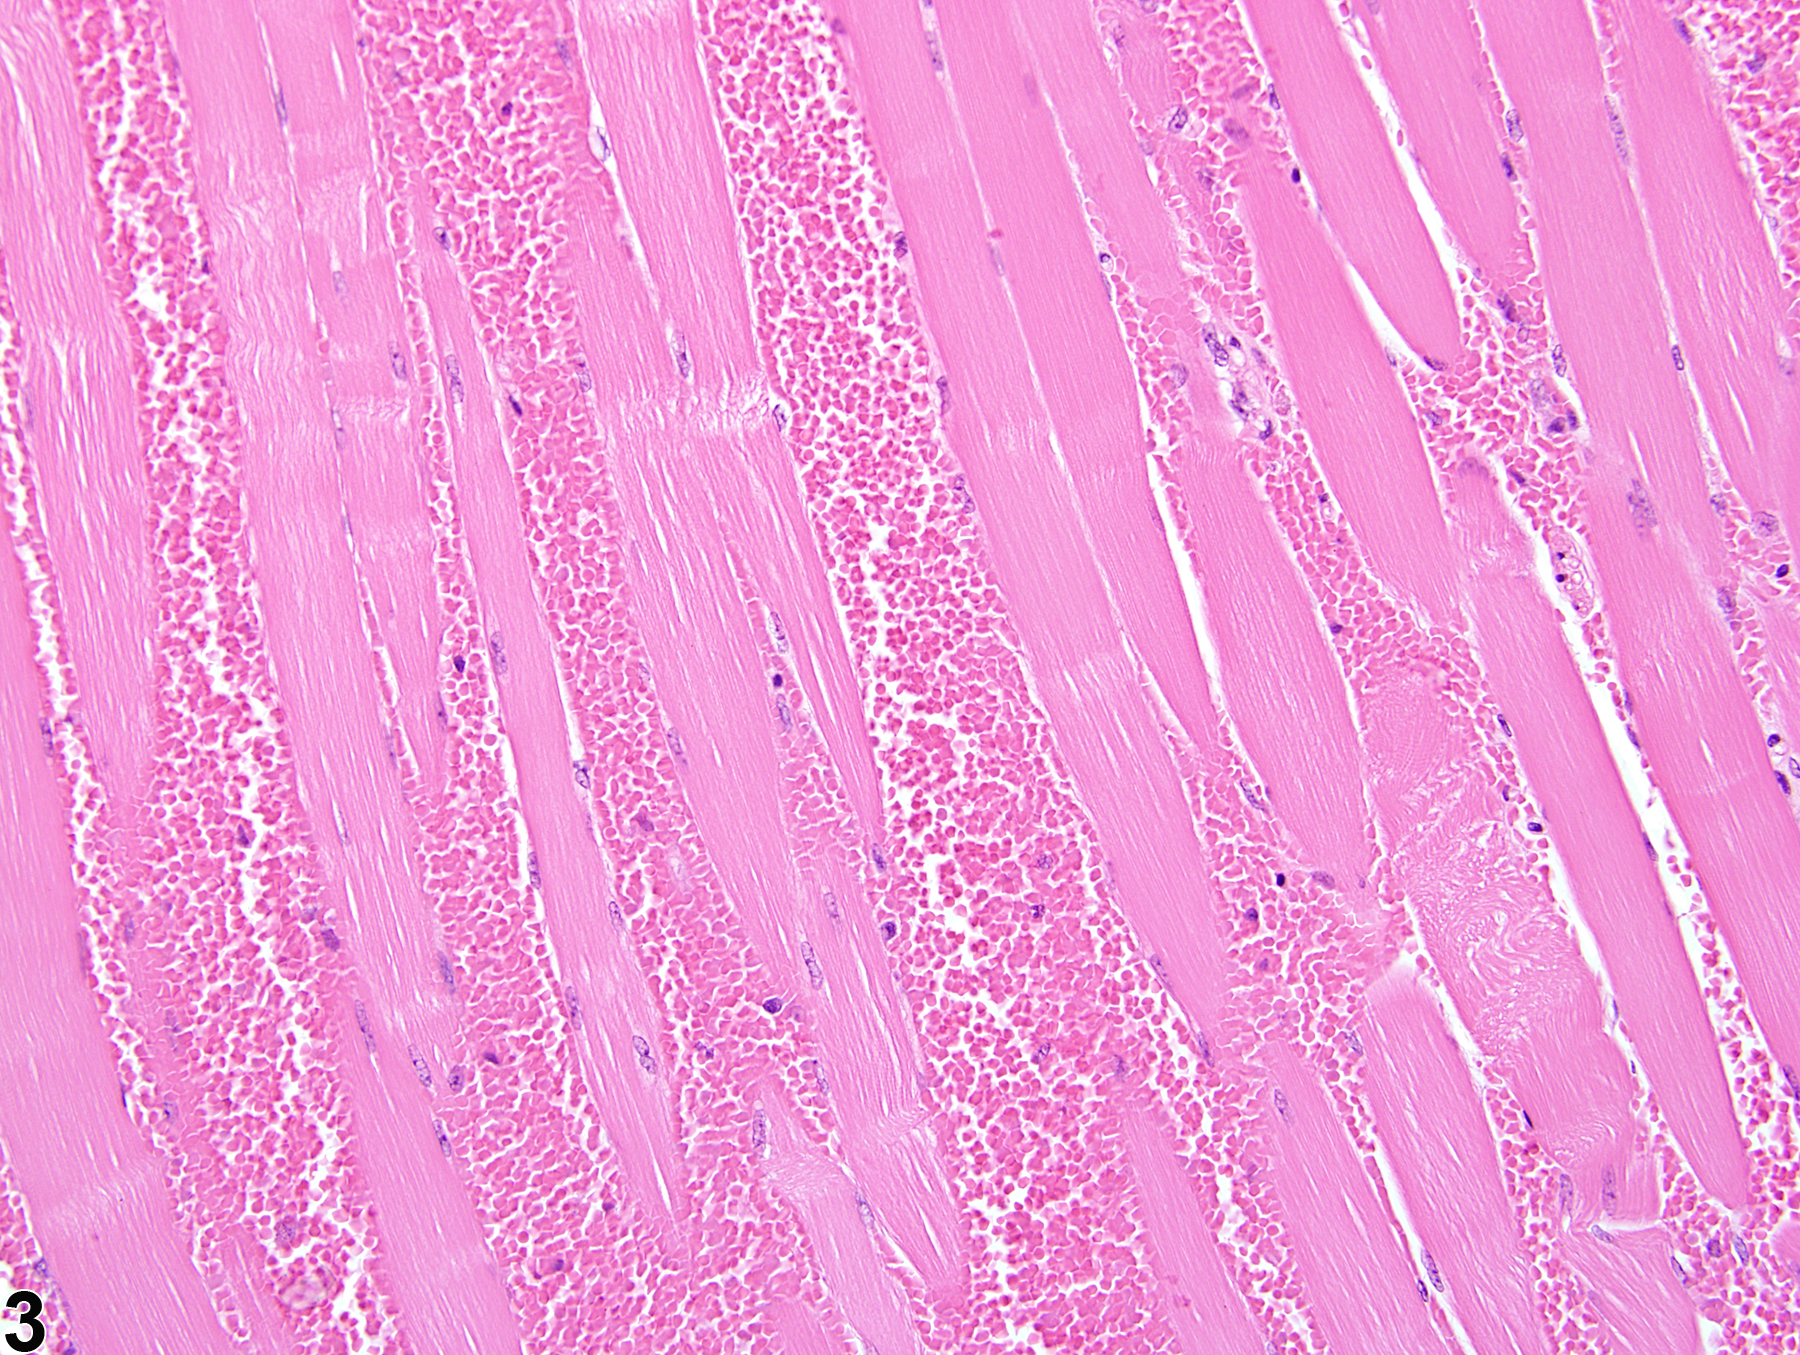 Image of hemorrhage in the skeletal muscle from a female B6C3F1/N mouse in a chronic study